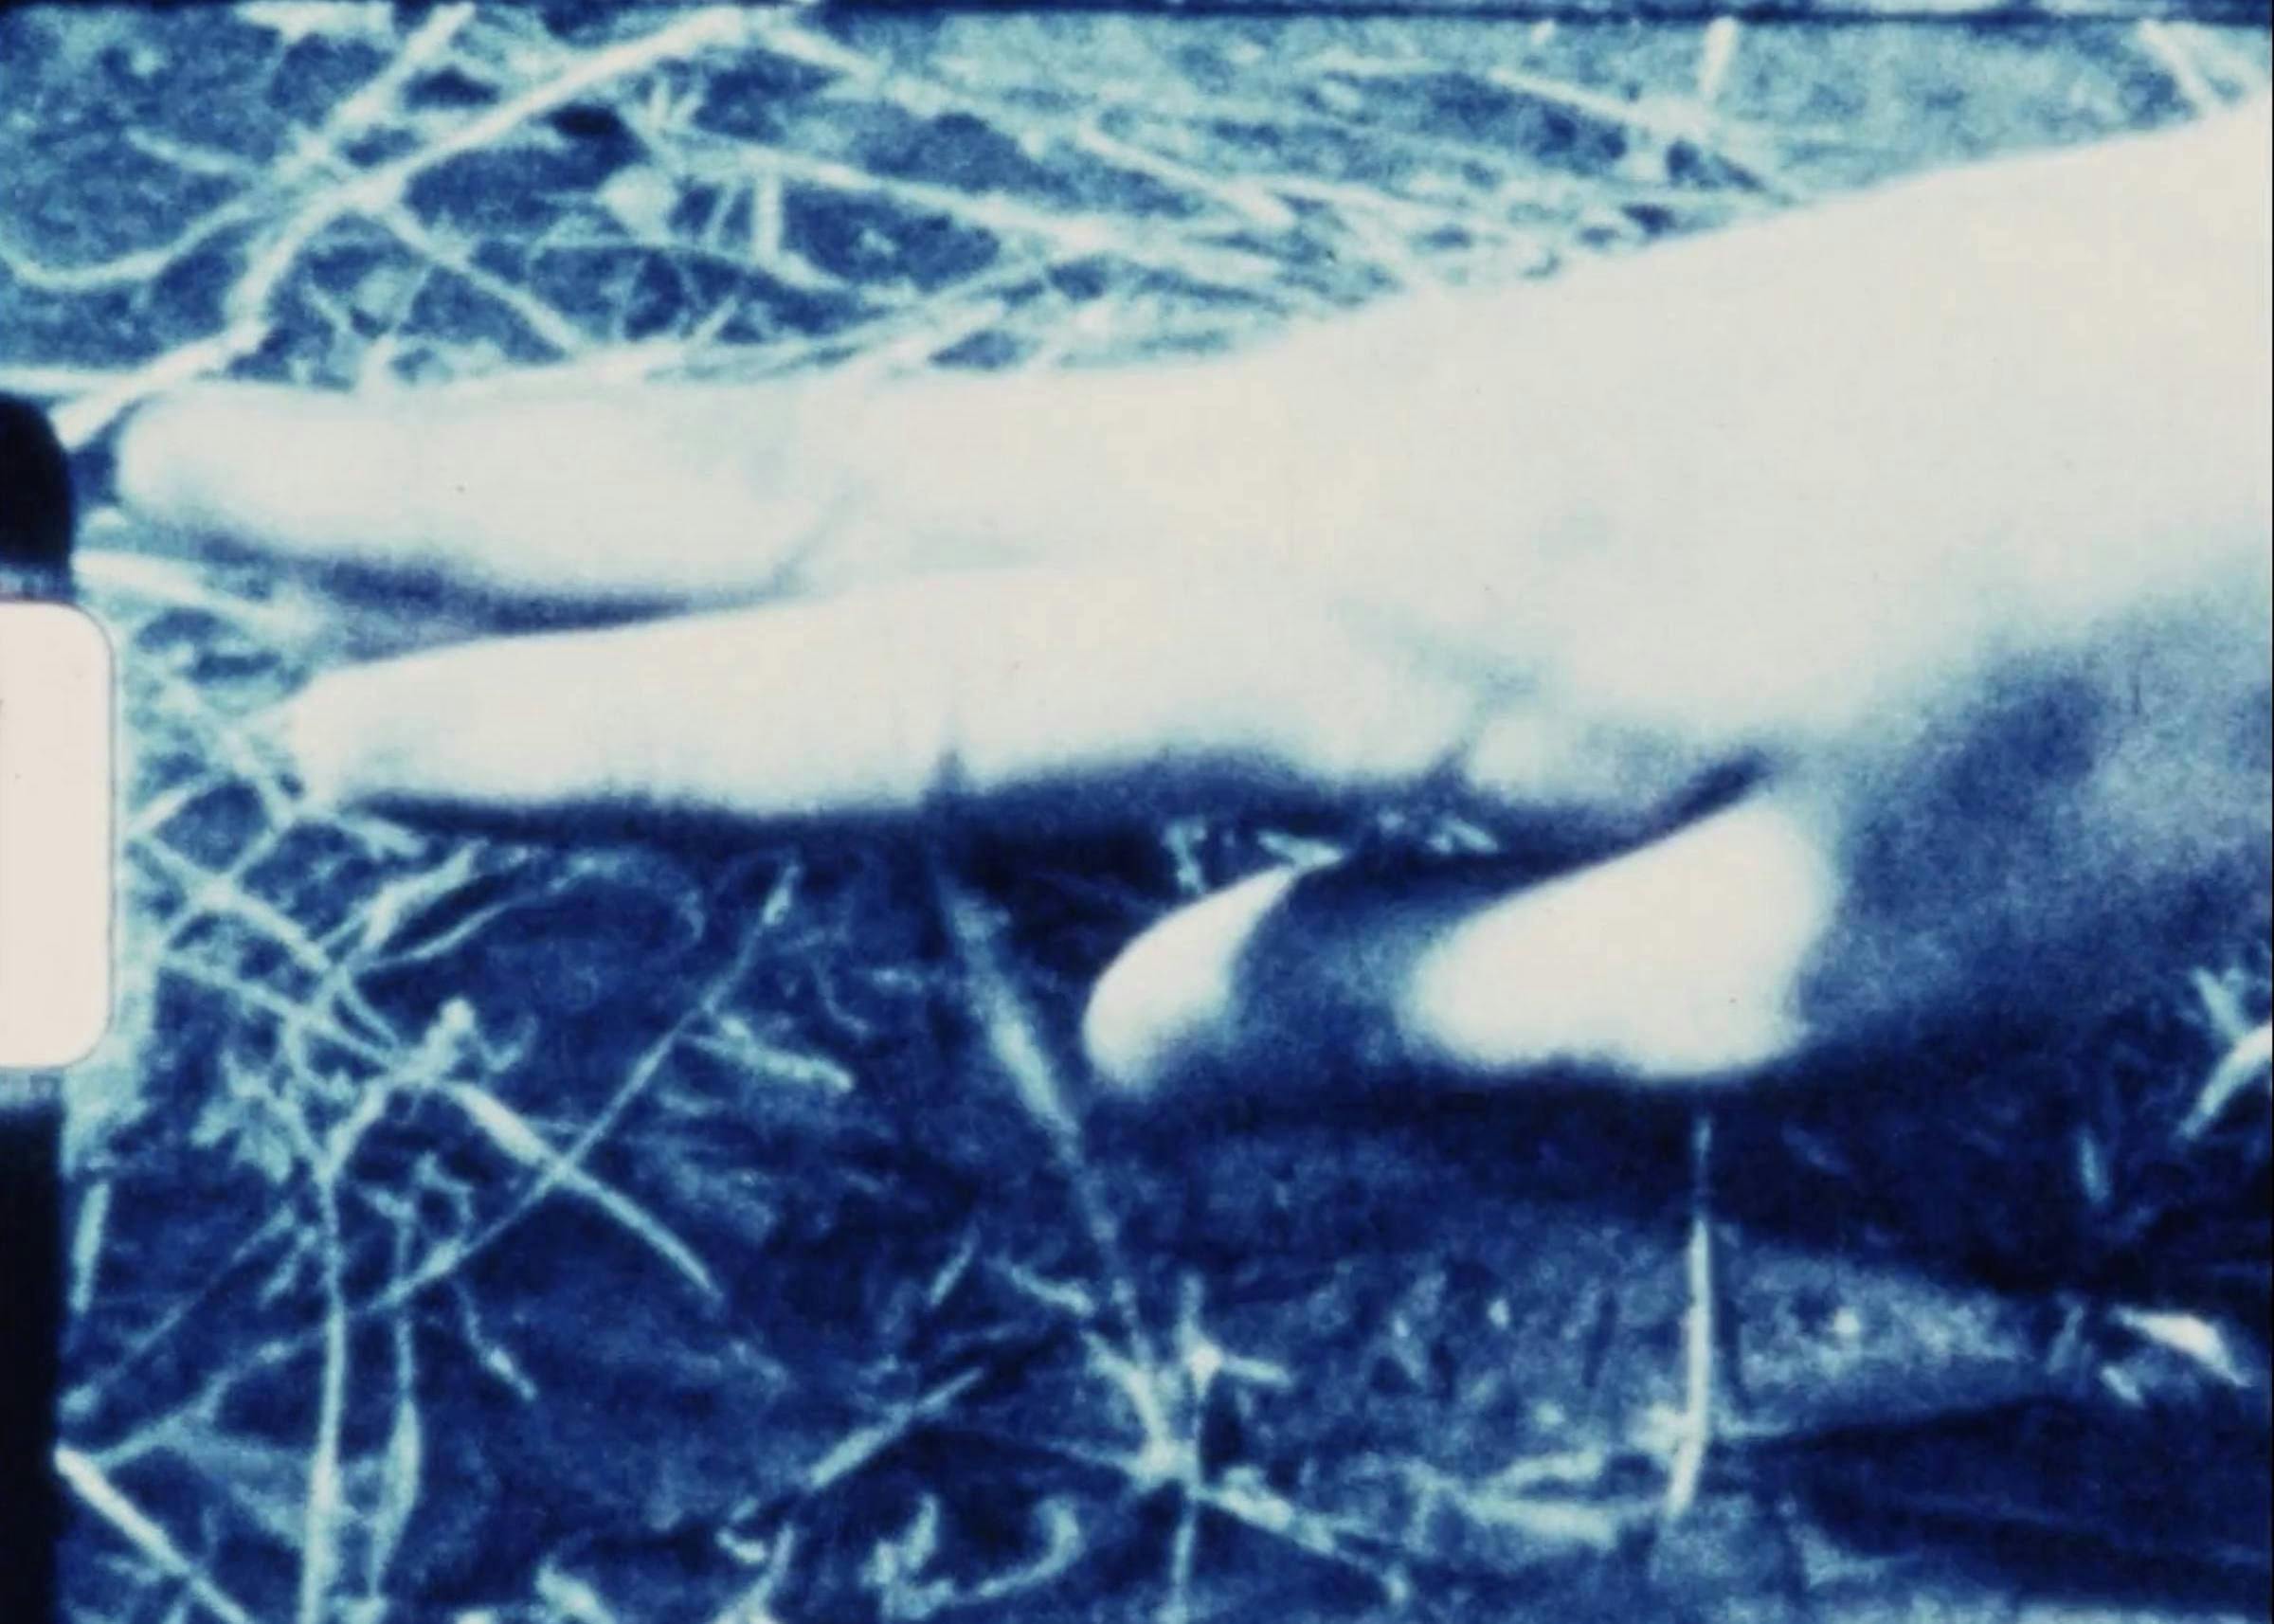 Distorted image of a piece of film with the image of a hand on some grass in a blue color